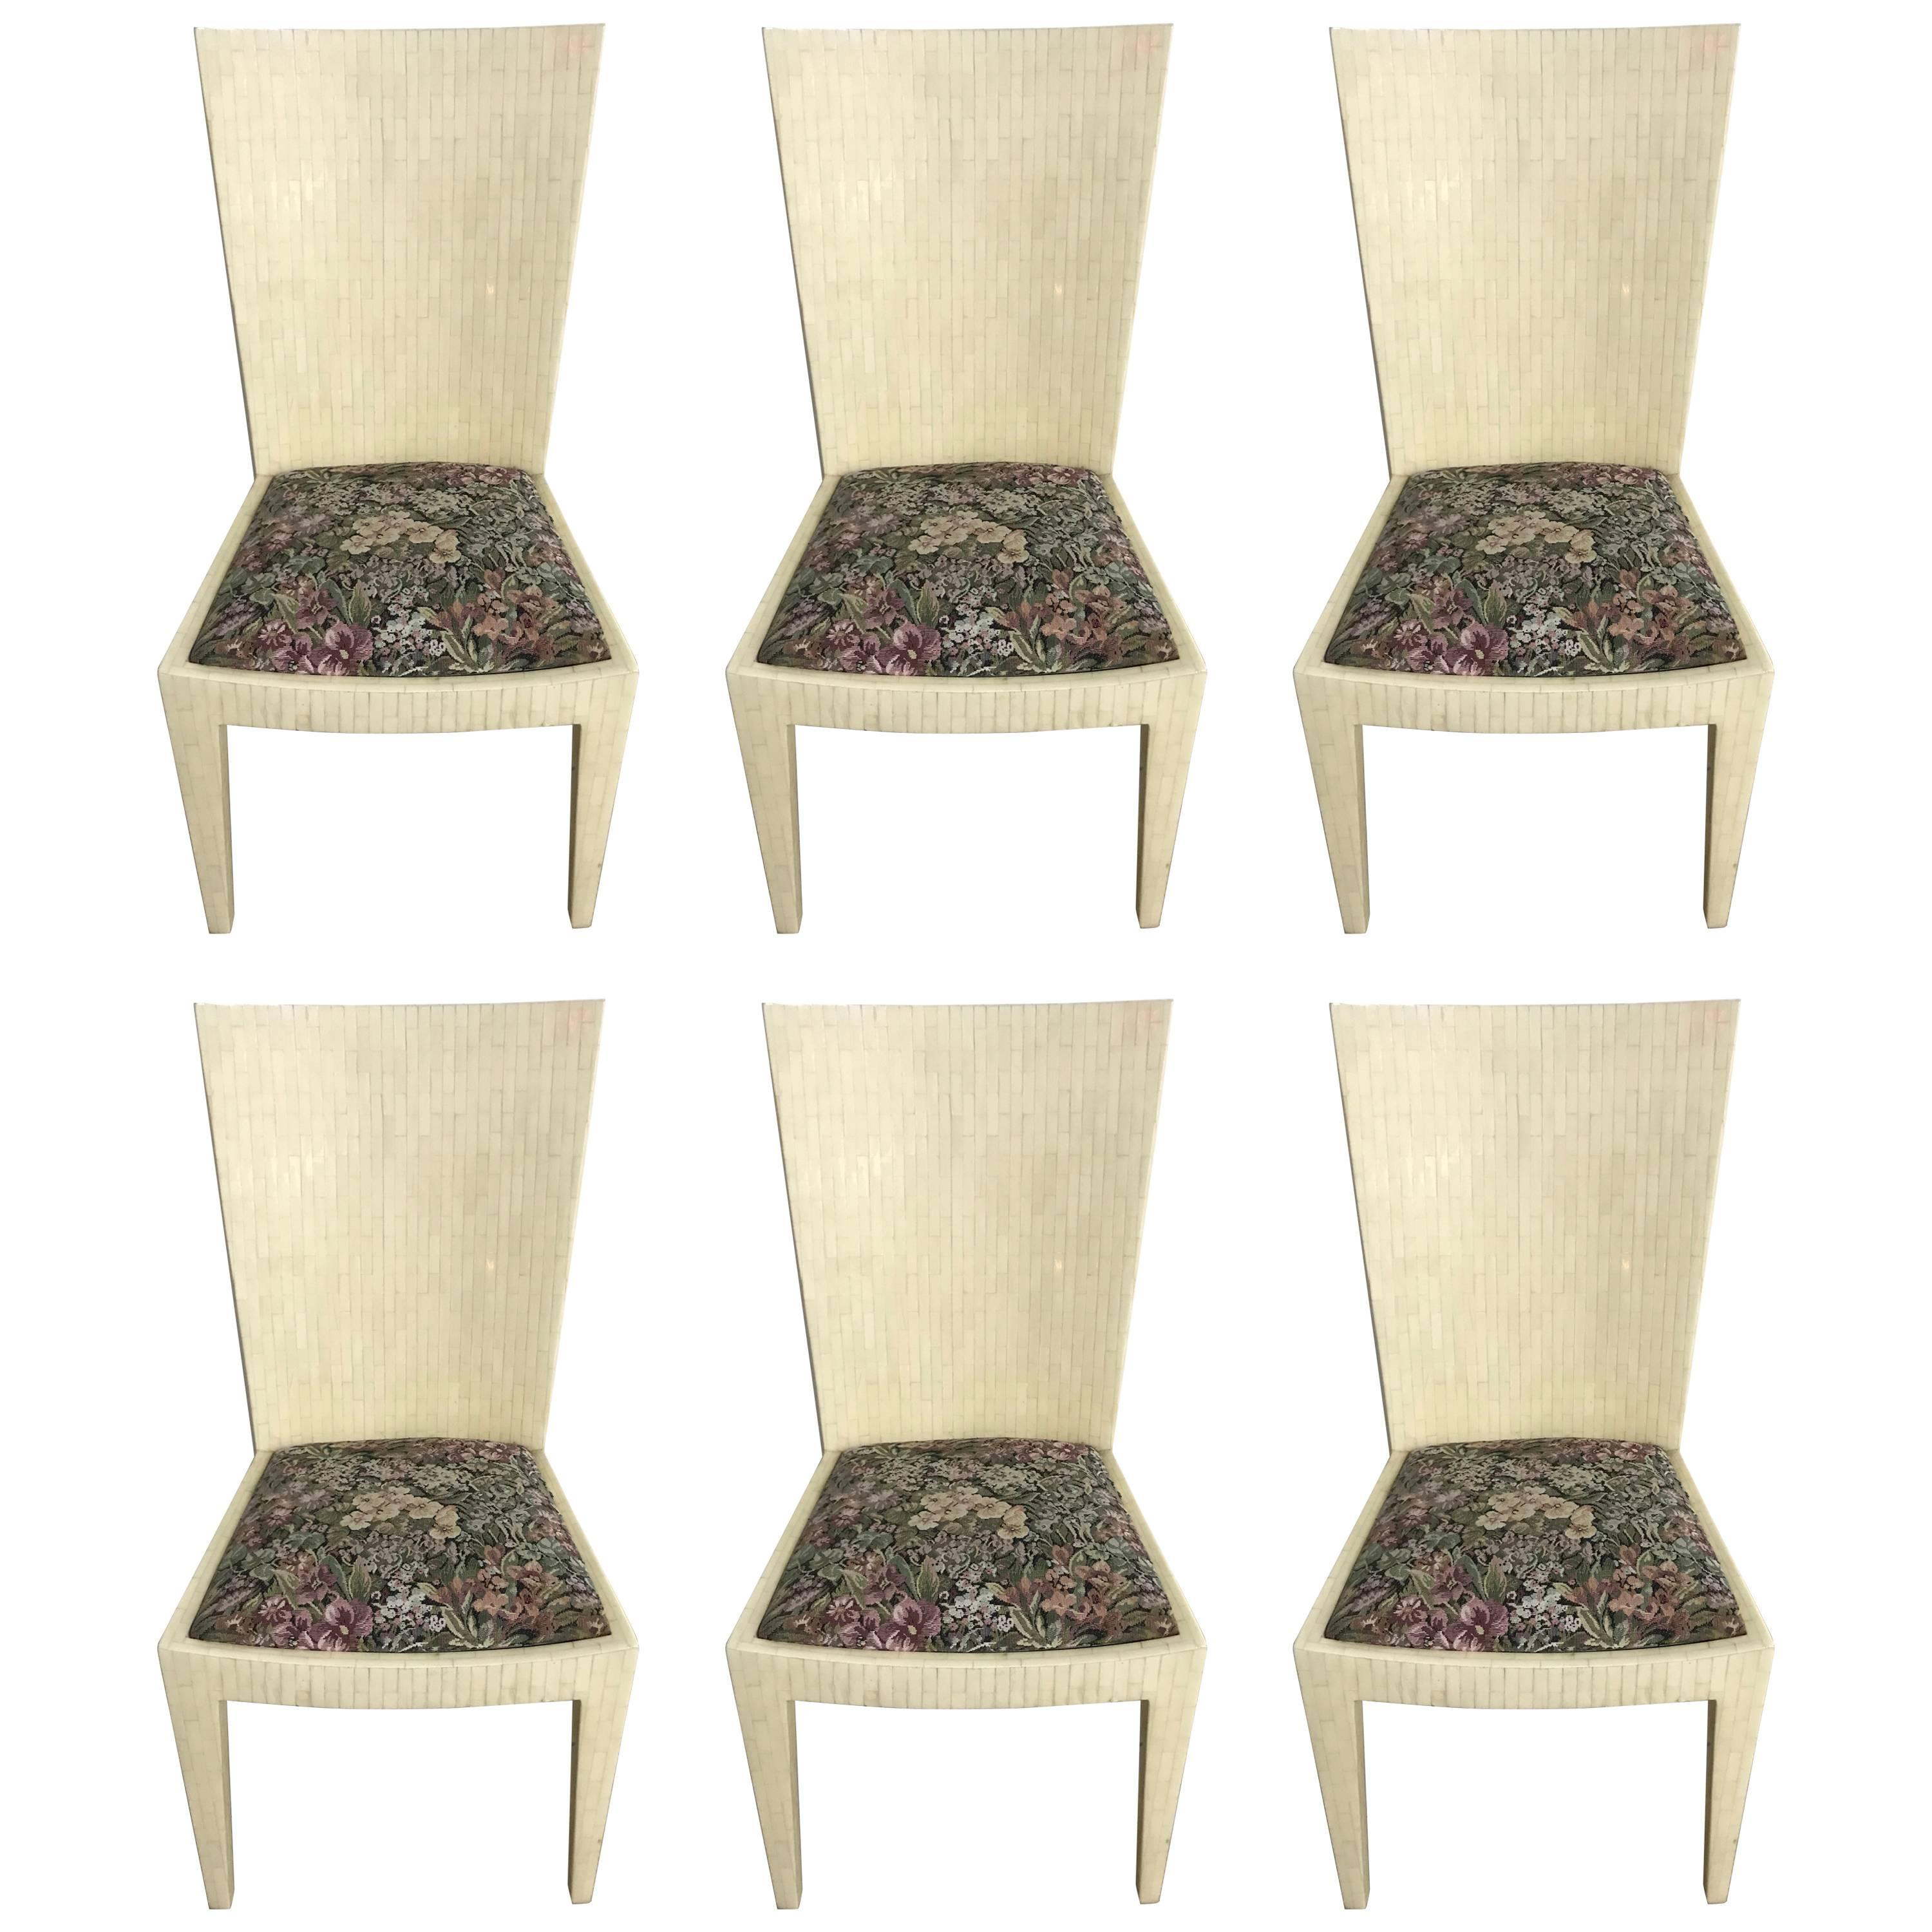 Set of Six Jimeco Tessellated Camel Bone Inlaid Dining Chairs